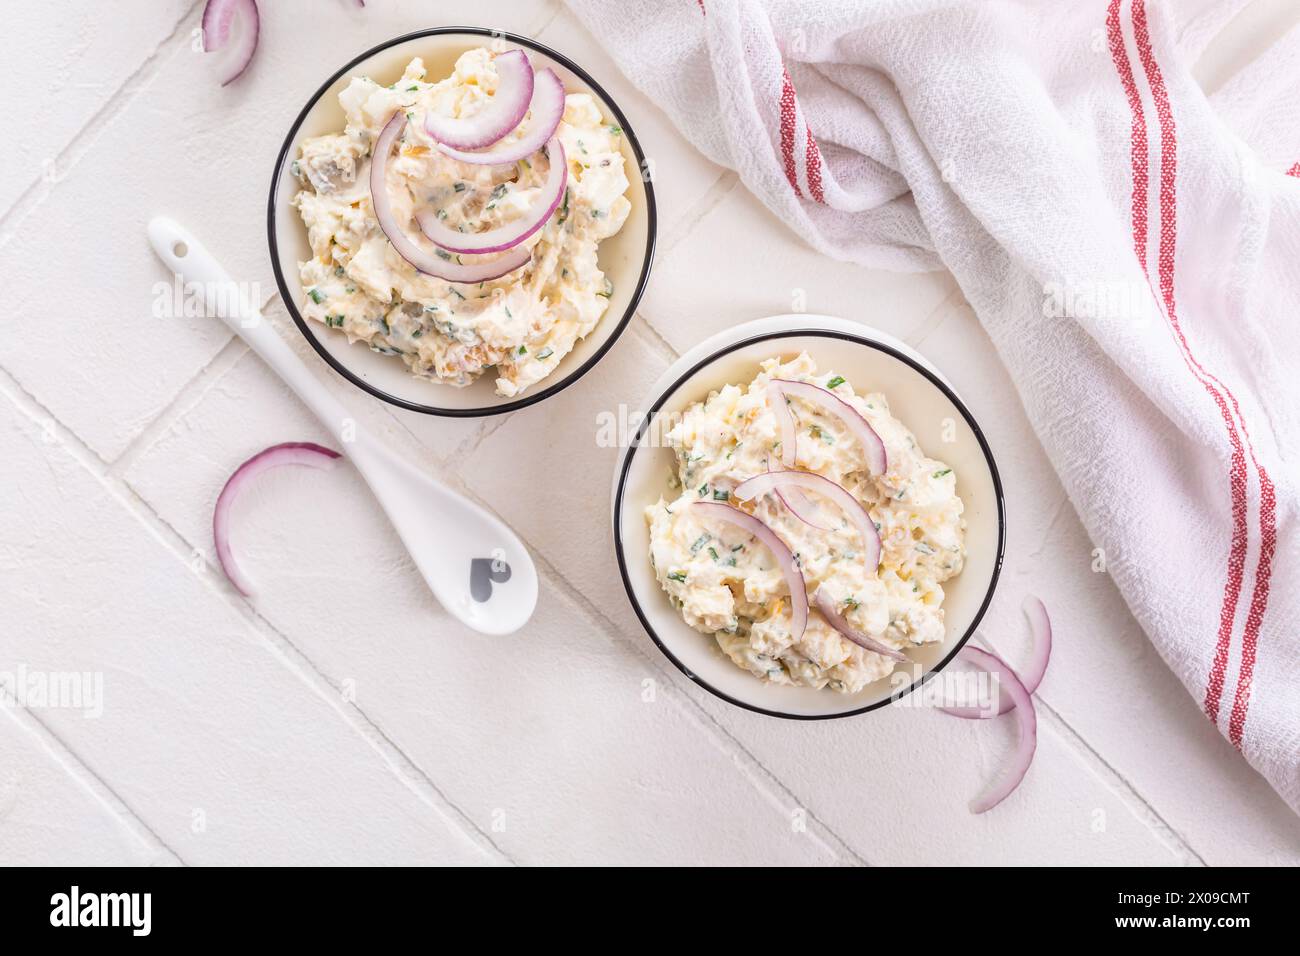 Fish and egg spread, paste or salad with red onions Stock Photo